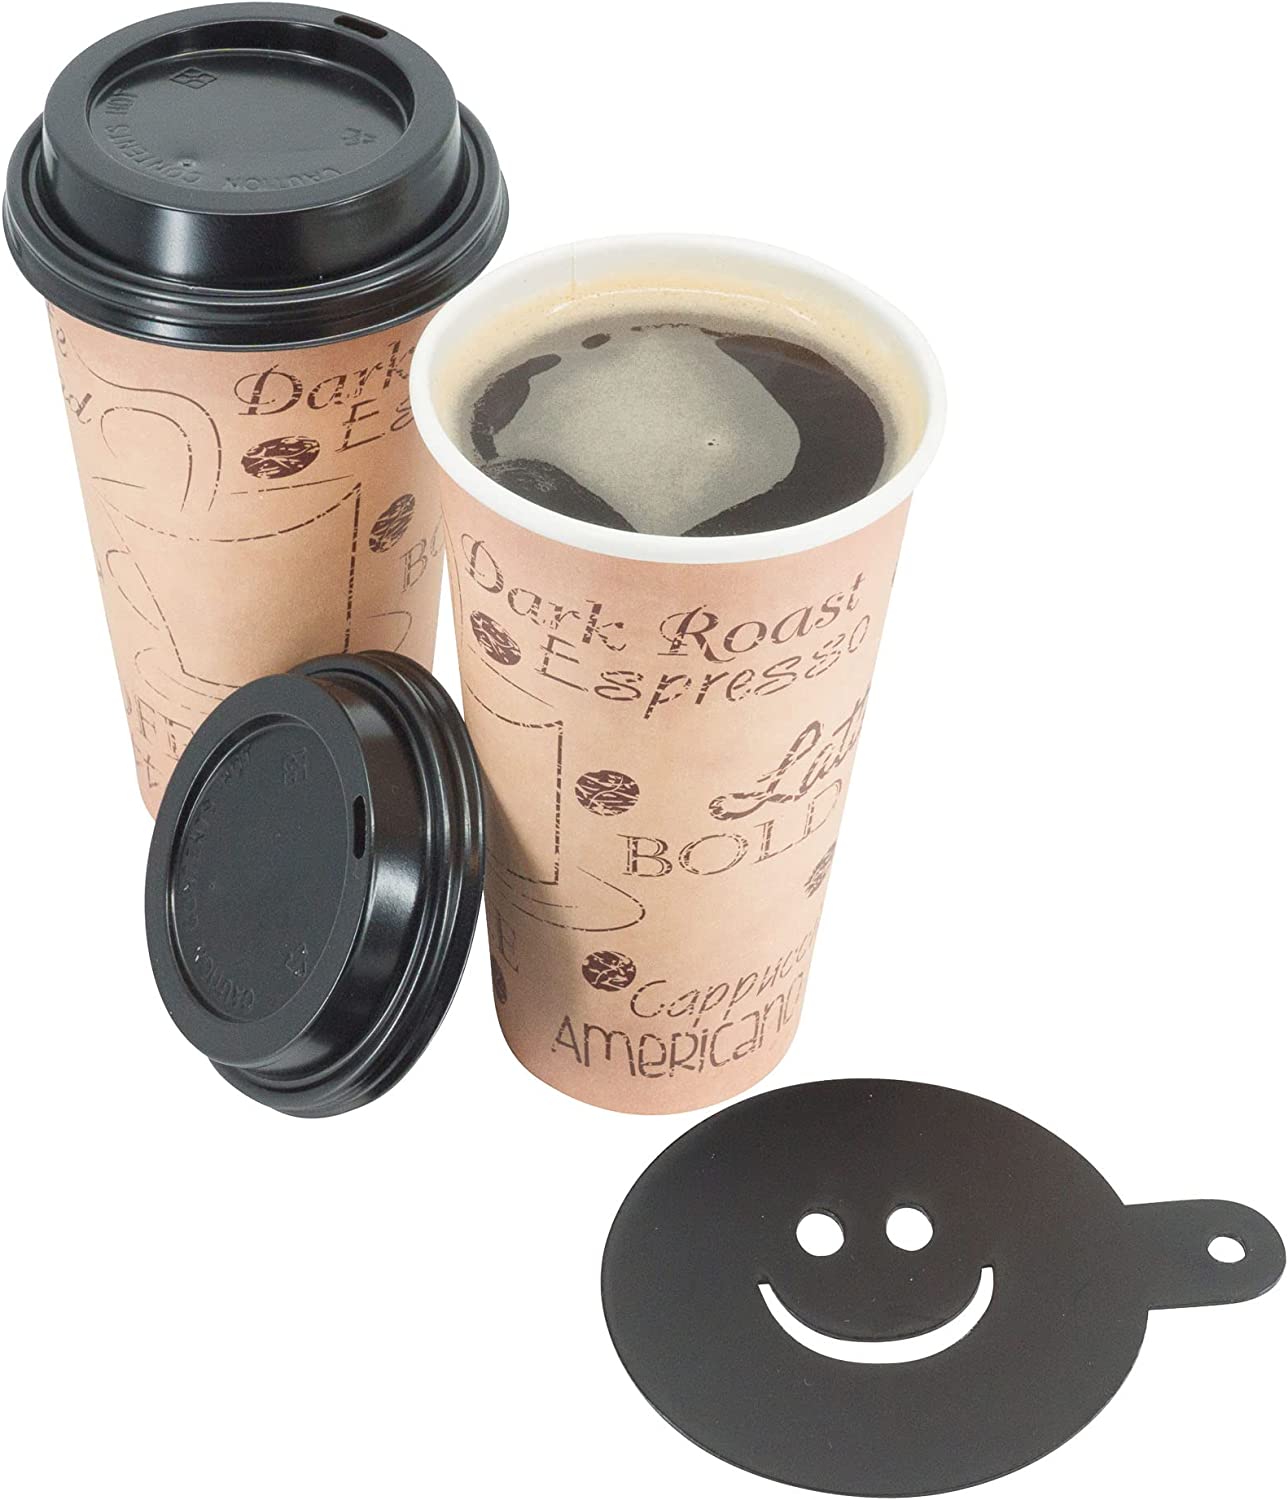 12 Ounce Disposable Paper Coffee Hot Cups with Black Lids - 50 Sets - Coffee Latte Macchiato to Go Medium Portion